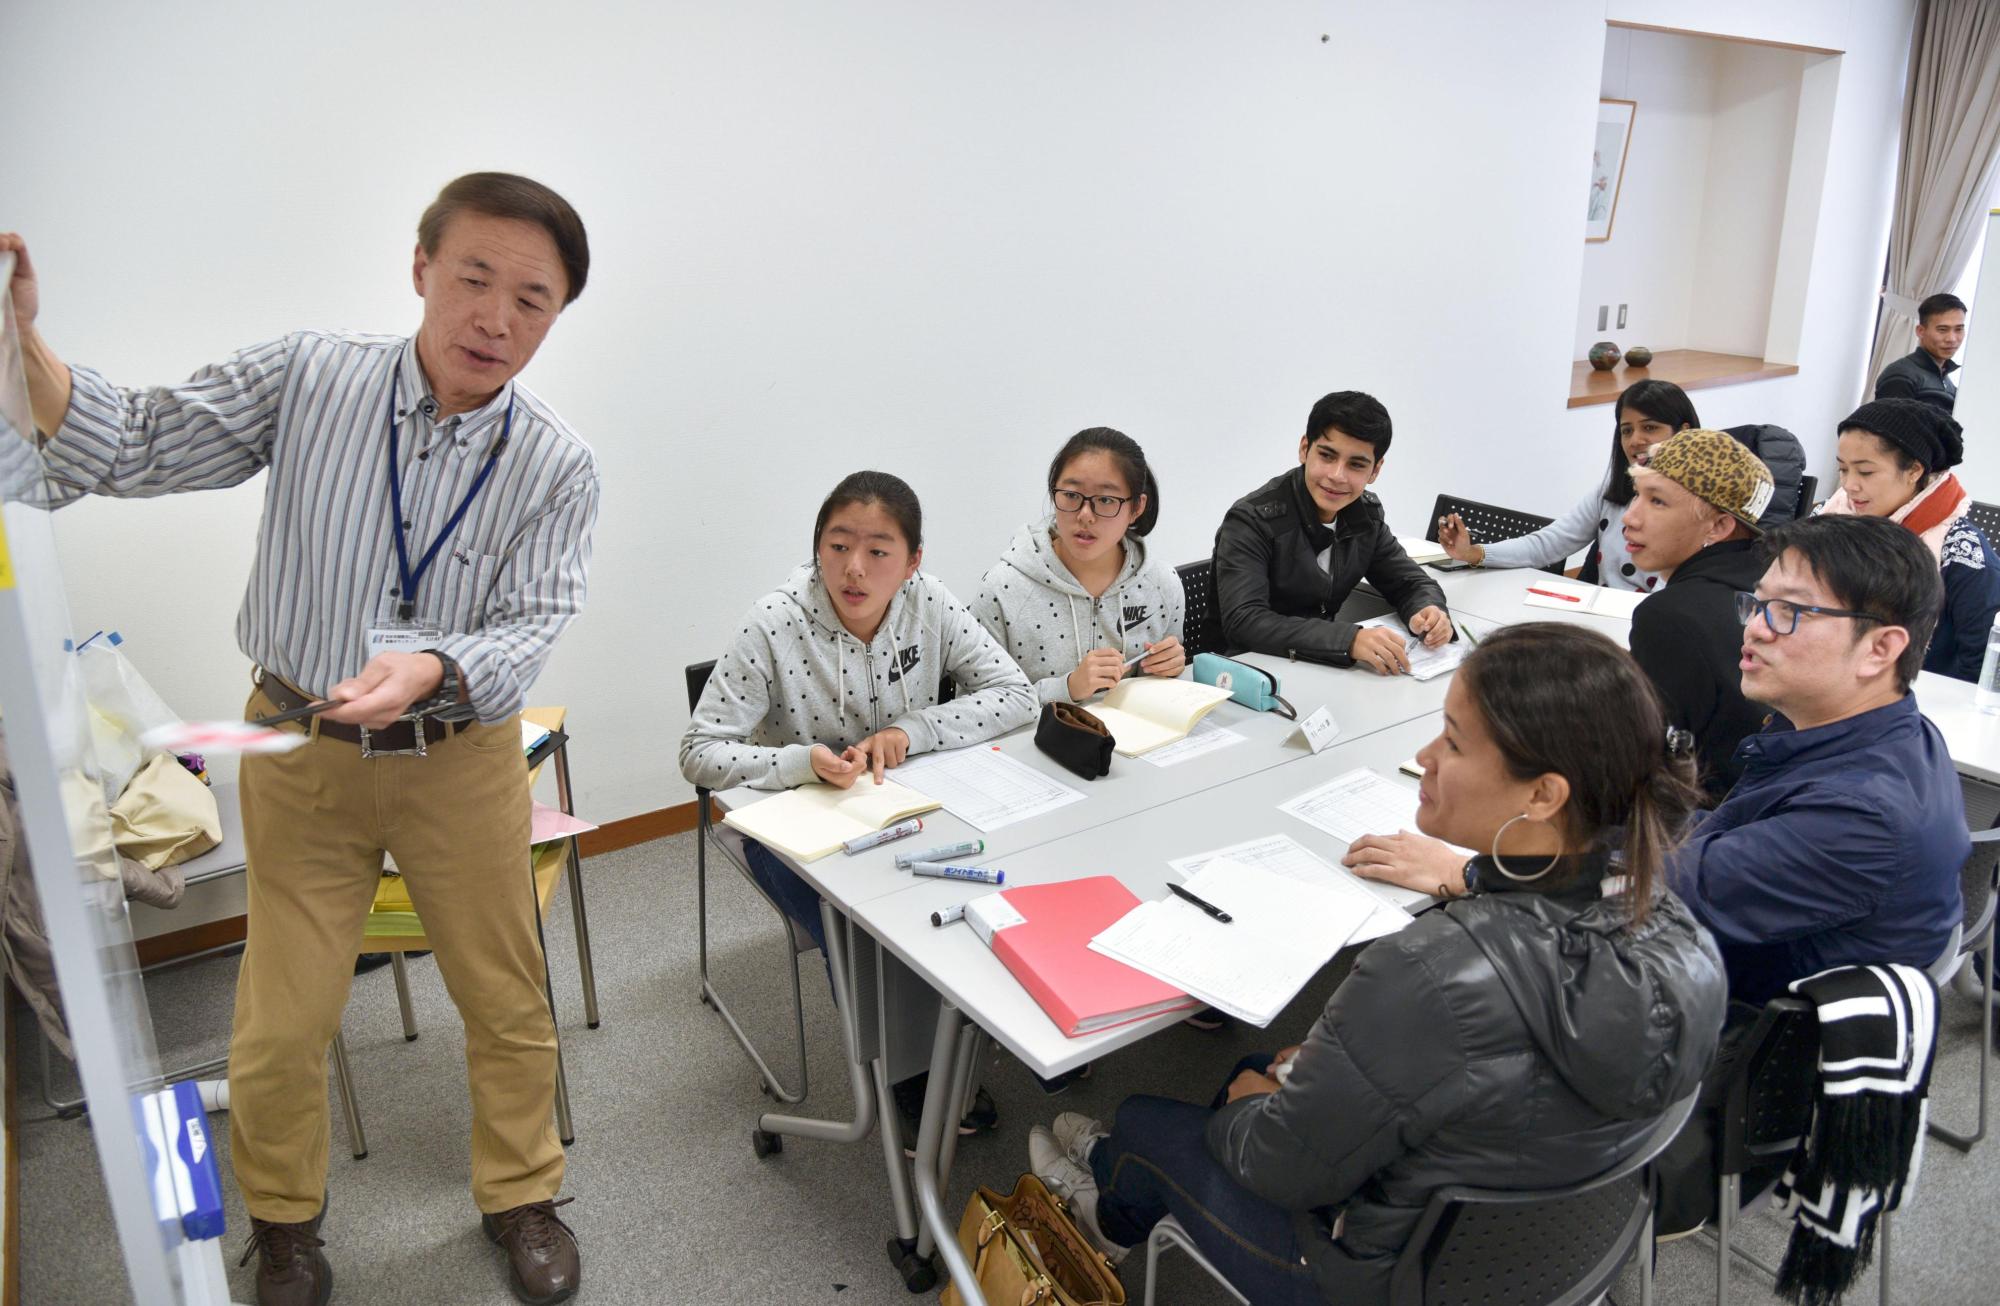 Foreign workers under the Technical Intern Training Program take a Japanese language lesson in Kariya, Aichi Prefecture, in December. | KYODO